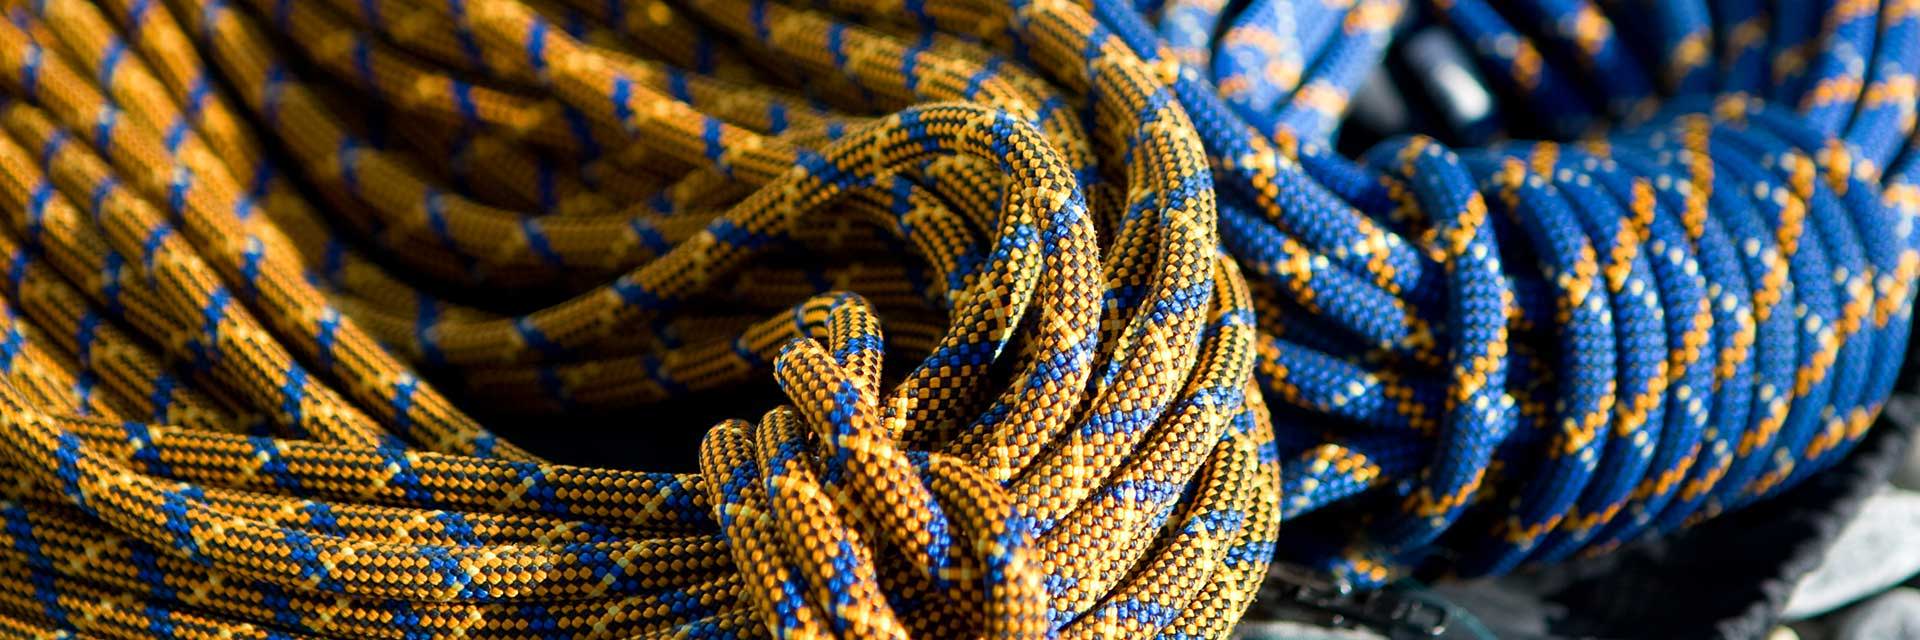 image of Pile of ropes